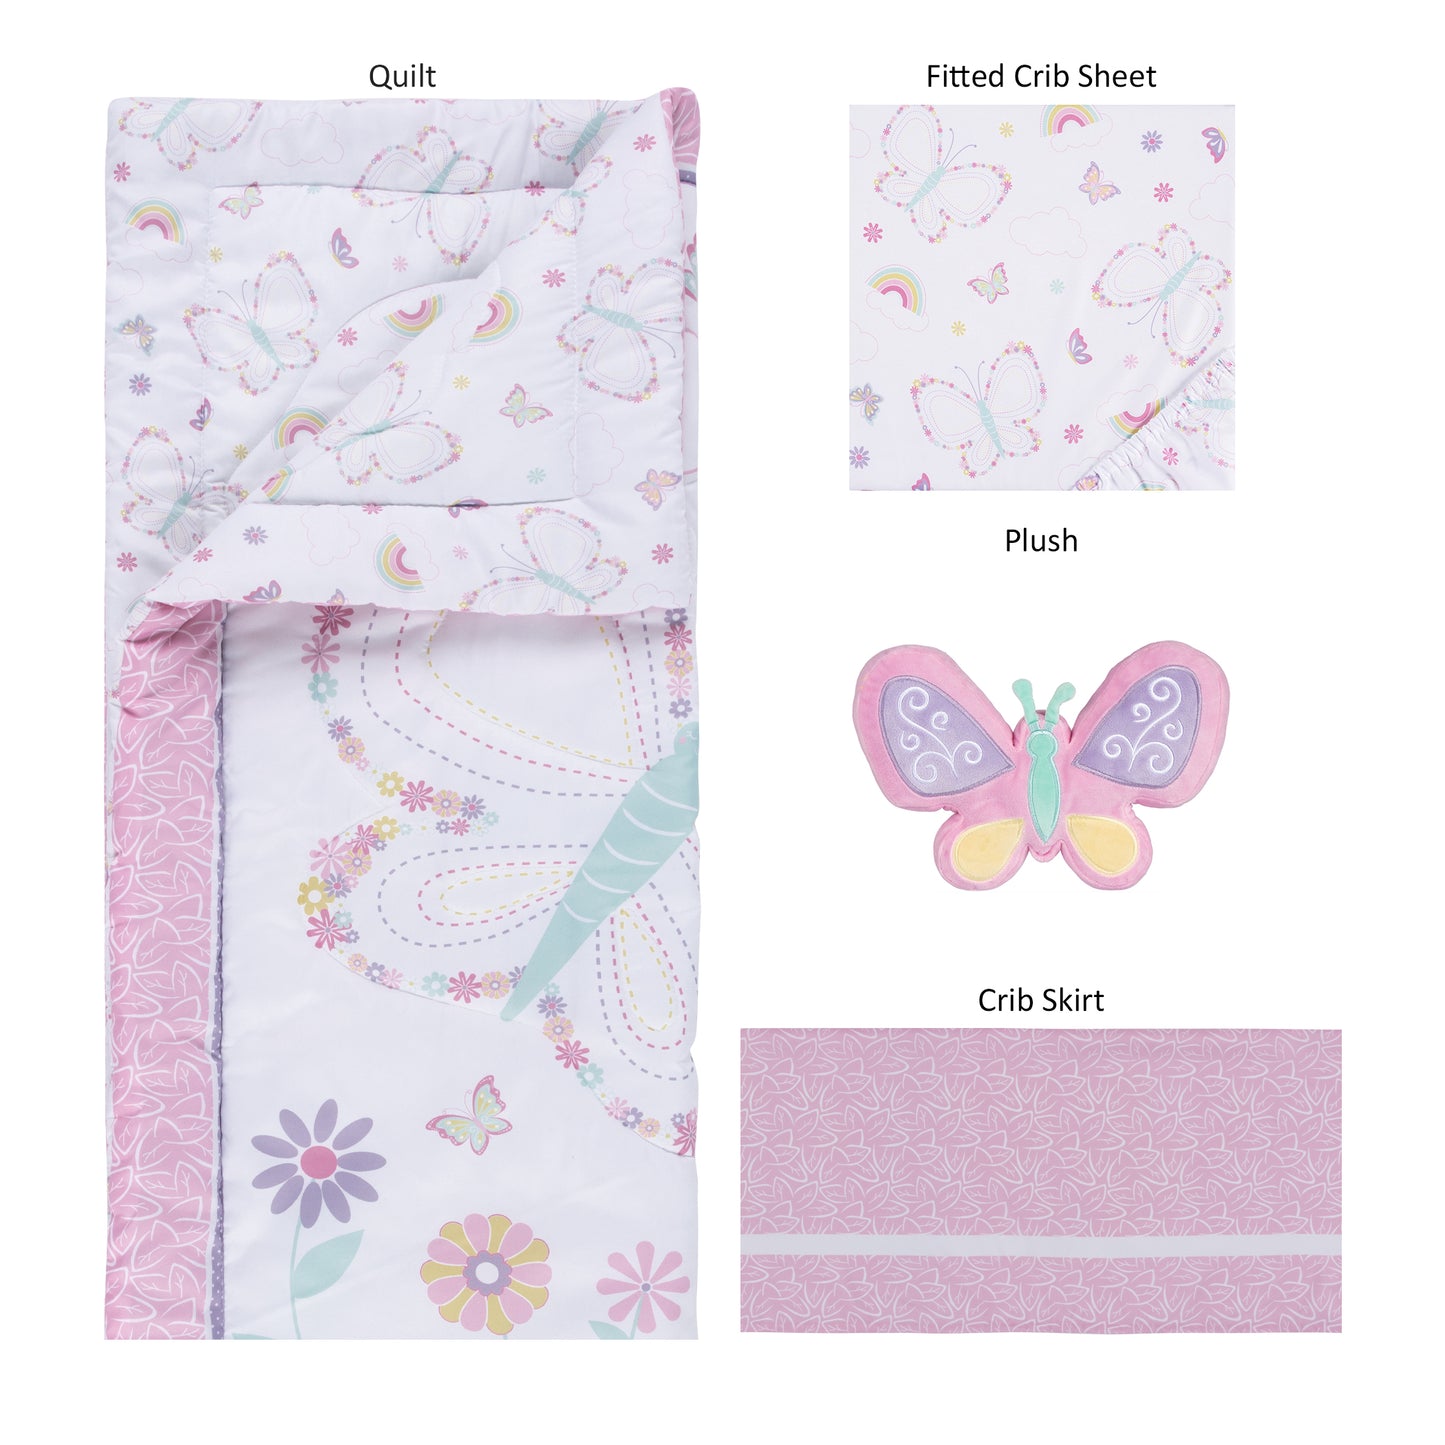 Floral Butterfly 4 Piece Crib Bedding Set; pieces laid out includes nursery quilt, crib sheet, crib skirt and butterfly plush toy